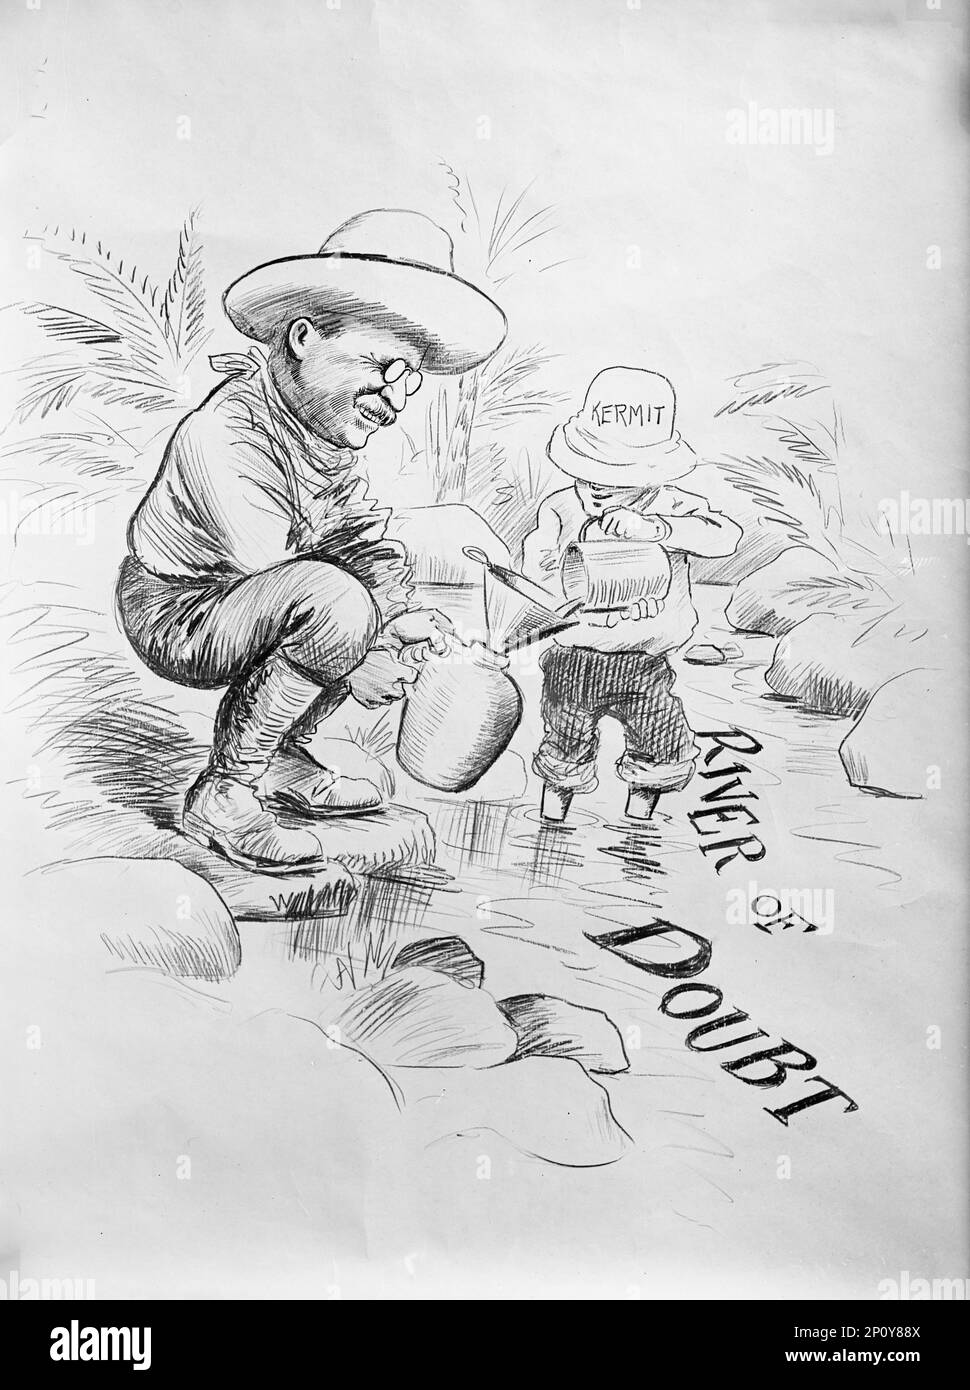 Theodore Roosevelt - Cartoon About The 'River of Doubt', 1914. Roosevelt and his son Kermit made an expedition into the Amazon Basin in Brazil to explore and map the area of the River of Doubt, later renamed Rio Roosevelt in honour of the President. Father and son both contracted malaria during the expedition. Stock Photo